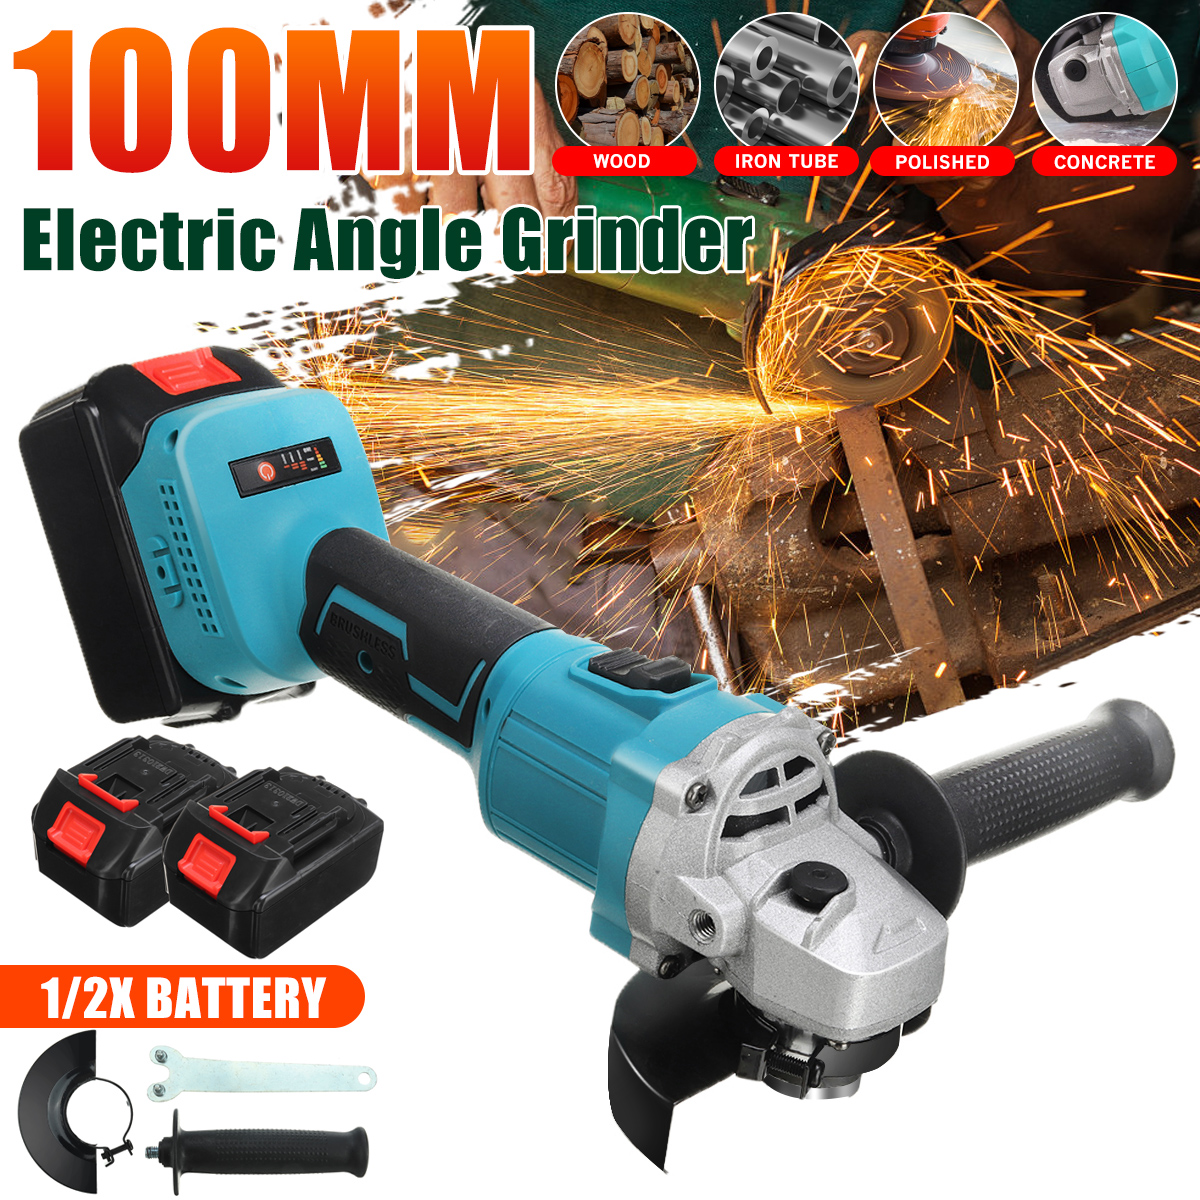 100mm-Brushless-Cordless-Angle-Grinder-3-Gears-Polishing-Grinding-Cutting-Tool-With-Battery-Also-For-1858791-2